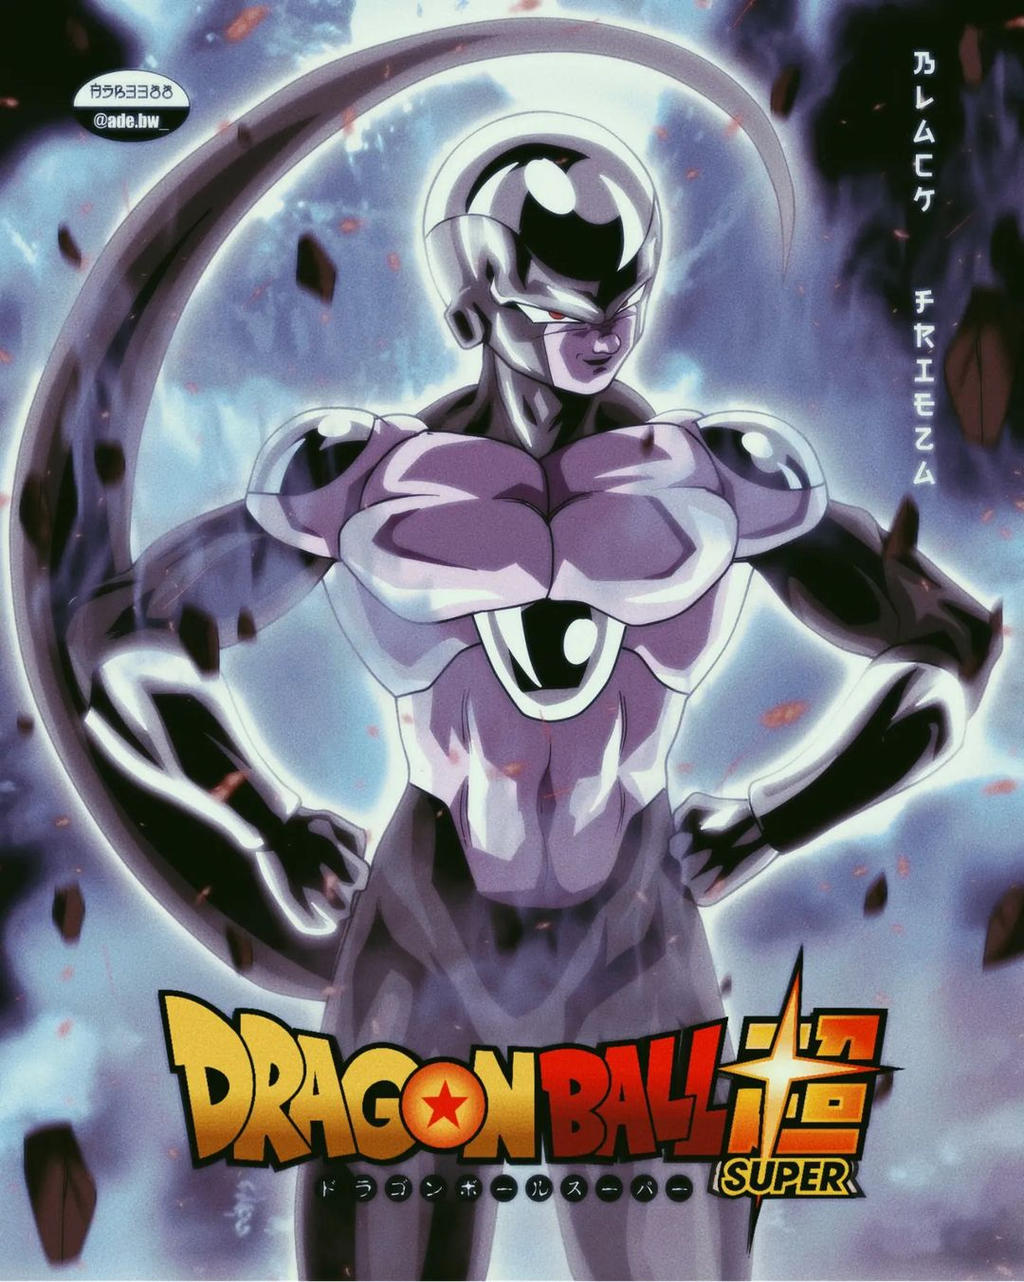 the_new_frieza_has_come_by_adb3388_dfbgxus-fullview.jpg